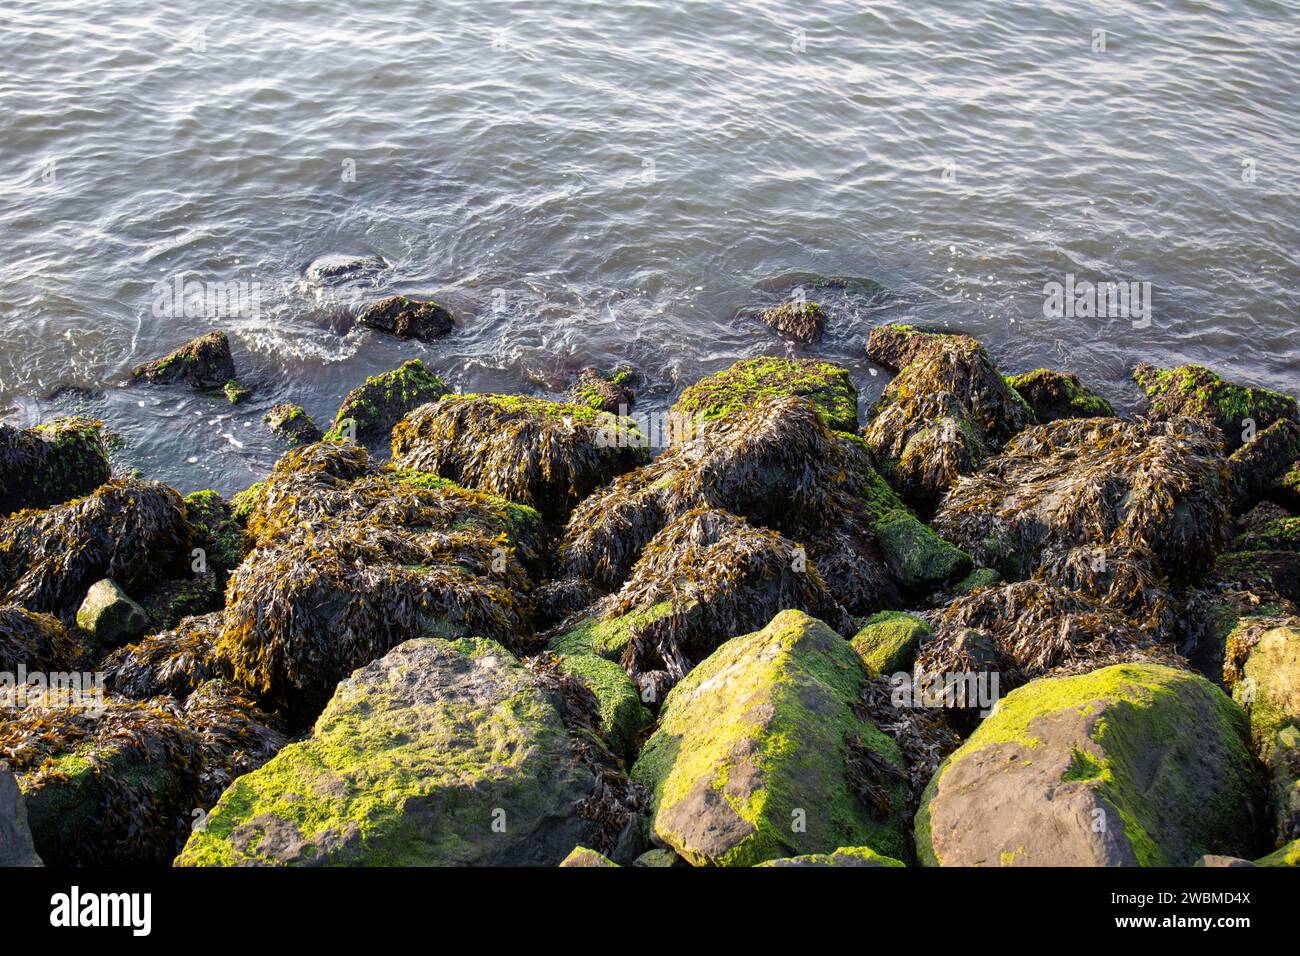 A picturesque coastal scene featuring large moss covered rocks at the edge of the ocean, with the waves gently lapping against them Stock Photo